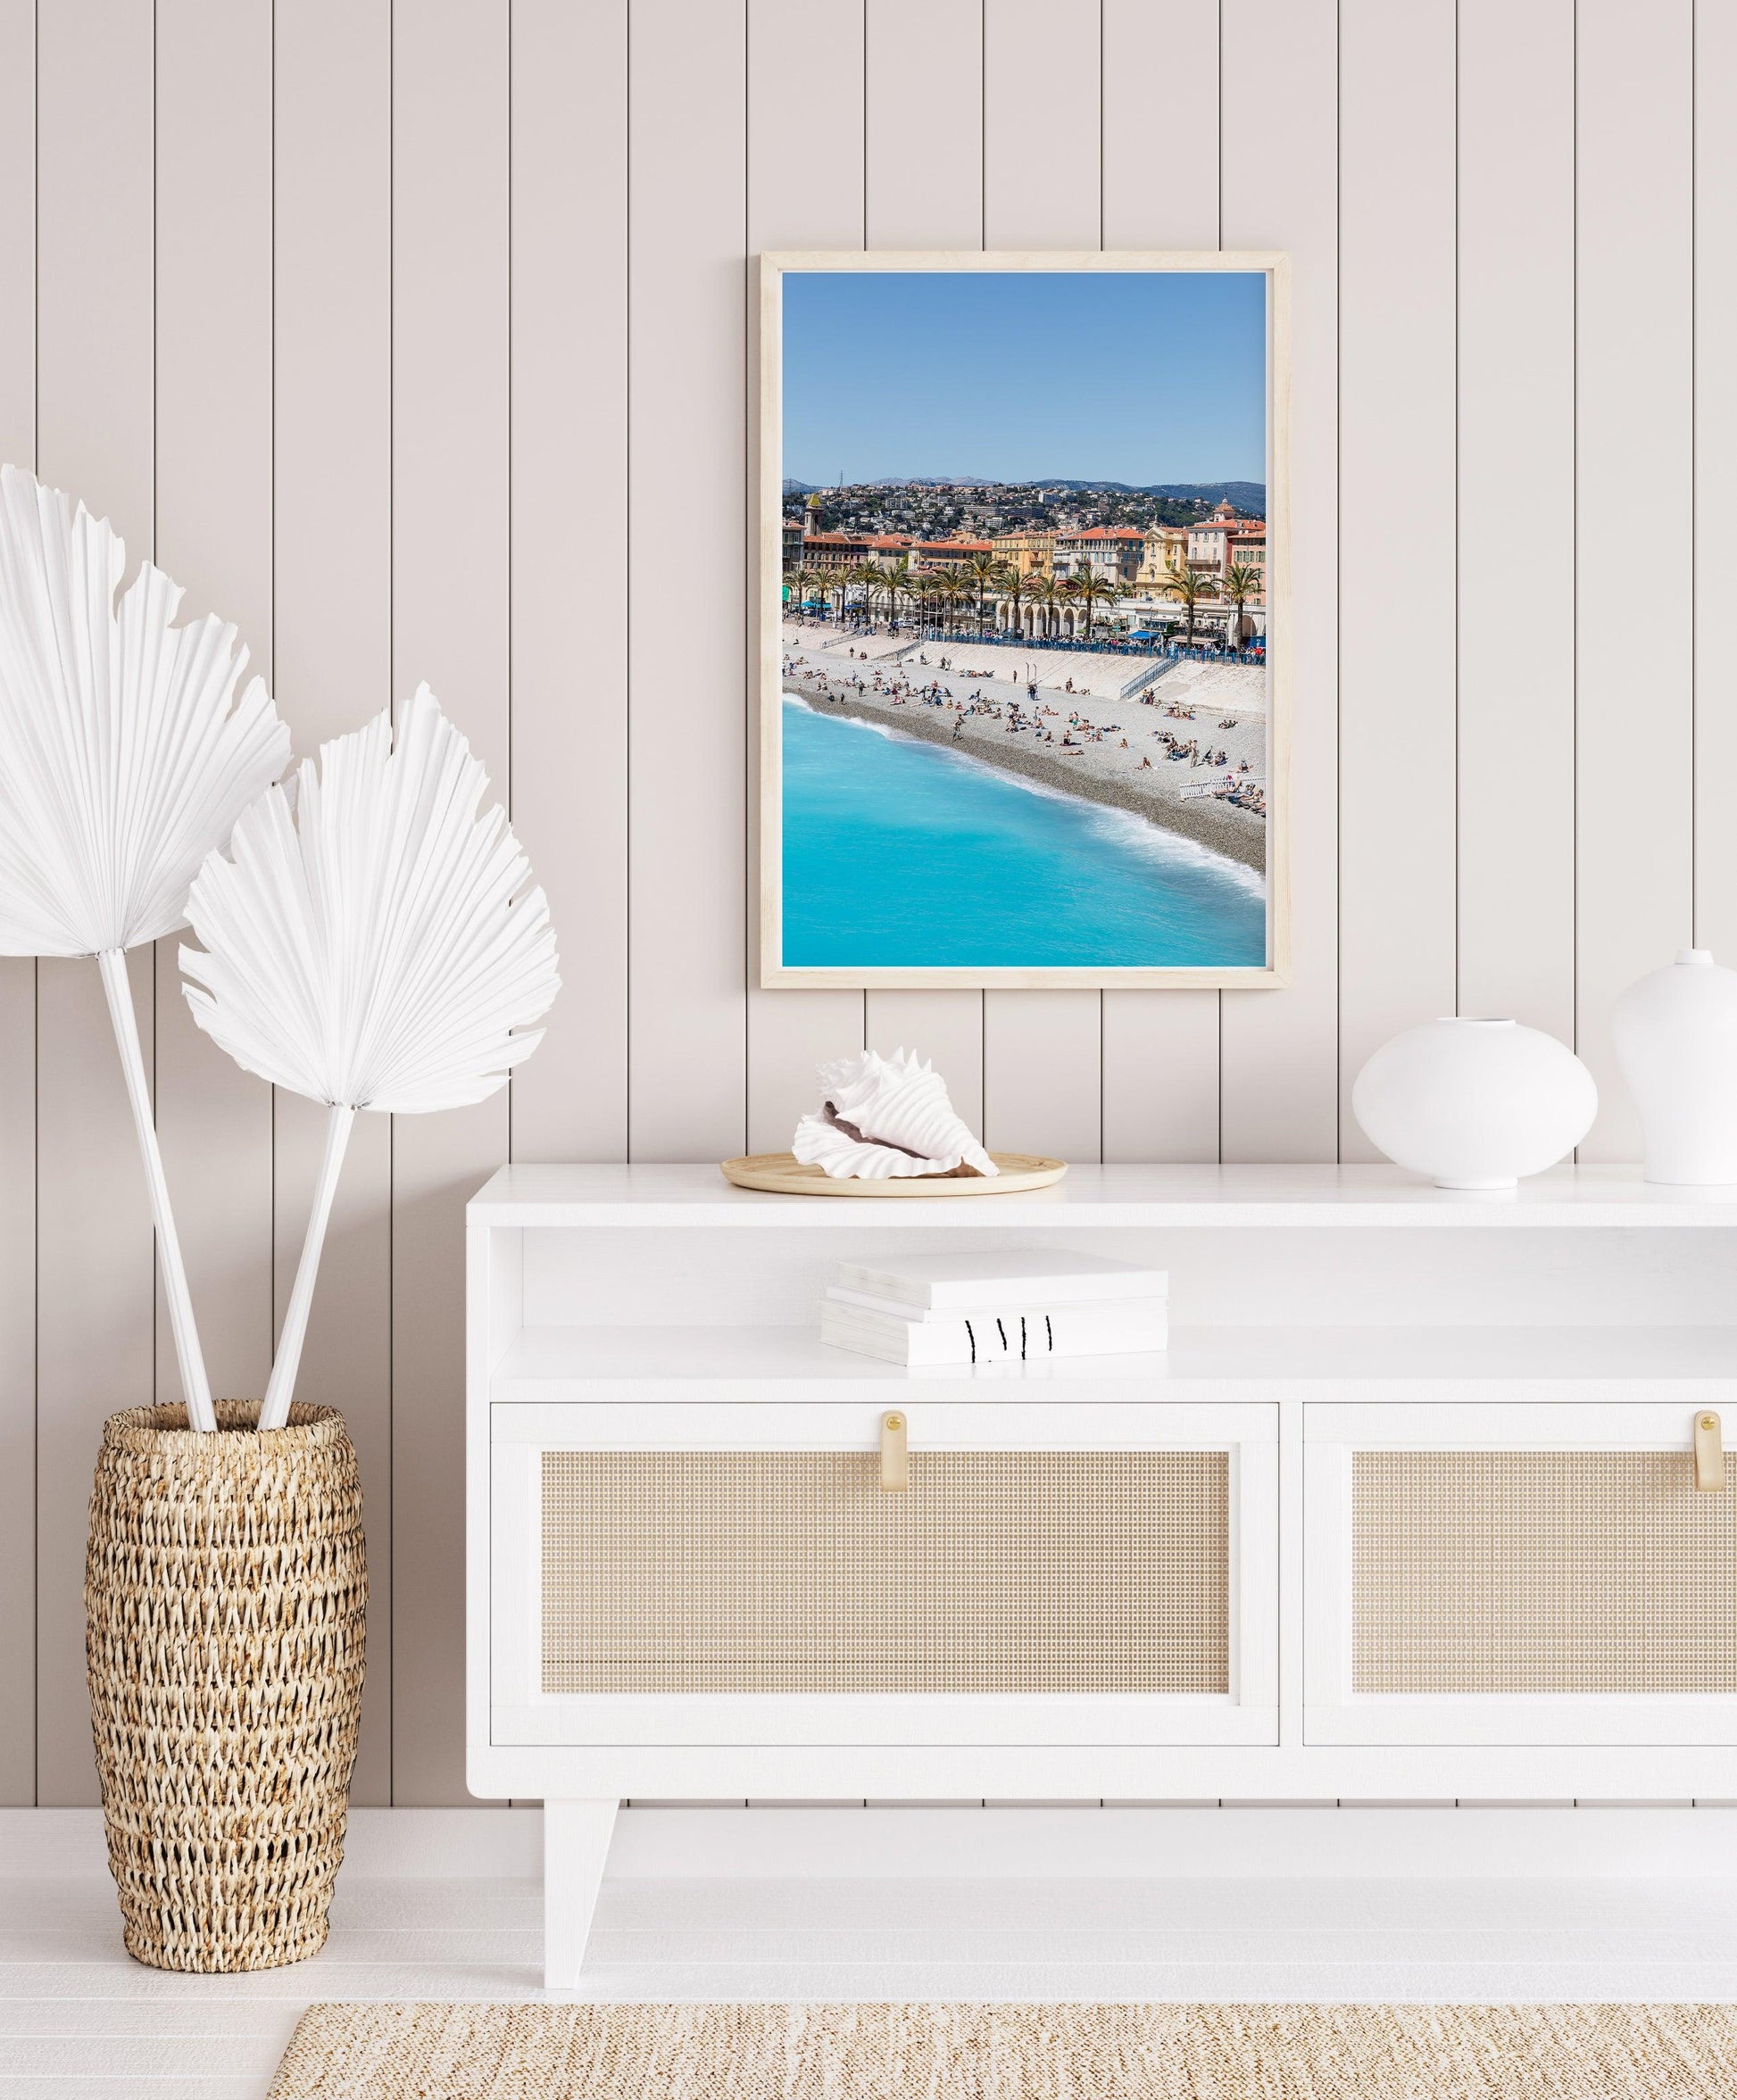 Beaches of Nice France | French Riviera Photography Print - Departures Print Shop